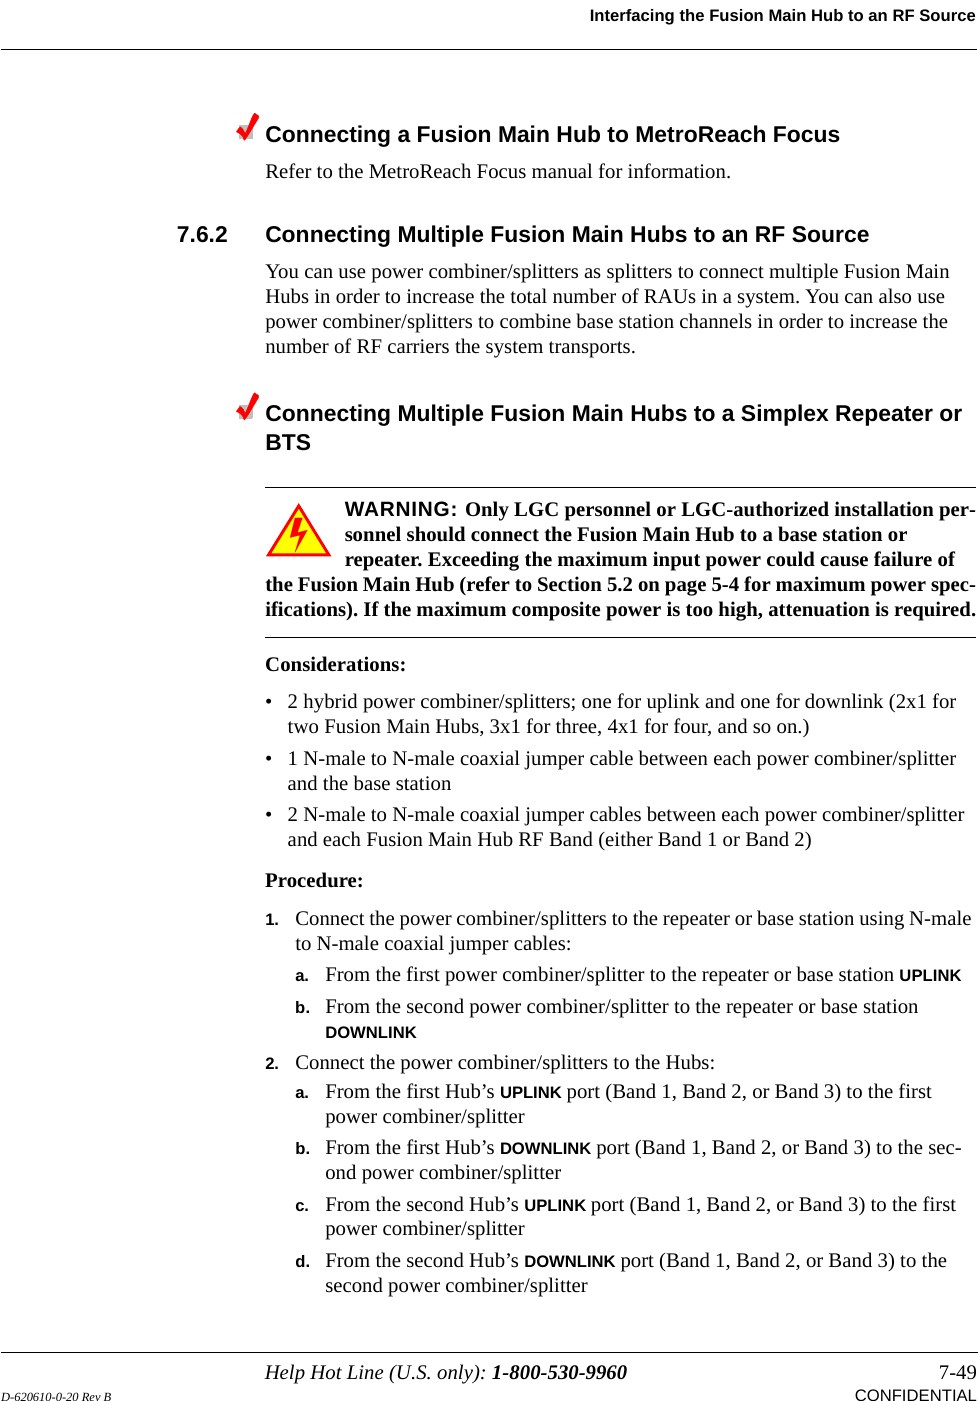 Help Hot Line (U.S. only): 1-800-530-9960 7-49D-620610-0-20 Rev B CONFIDENTIALInterfacing the Fusion Main Hub to an RF SourceConnecting a Fusion Main Hub to MetroReach FocusRefer to the MetroReach Focus manual for information.7.6.2 Connecting Multiple Fusion Main Hubs to an RF SourceYou can use power combiner/splitters as splitters to connect multiple Fusion Main Hubs in order to increase the total number of RAUs in a system. You can also use power combiner/splitters to combine base station channels in order to increase the number of RF carriers the system transports.Connecting Multiple Fusion Main Hubs to a Simplex Repeater or BTSWARNING: Only LGC personnel or LGC-authorized installation per-sonnel should connect the Fusion Main Hub to a base station or repeater. Exceeding the maximum input power could cause failure of the Fusion Main Hub (refer to Section 5.2 on page 5-4 for maximum power spec-ifications). If the maximum composite power is too high, attenuation is required.Considerations:• 2 hybrid power combiner/splitters; one for uplink and one for downlink (2x1 for two Fusion Main Hubs, 3x1 for three, 4x1 for four, and so on.)• 1 N-male to N-male coaxial jumper cable between each power combiner/splitter and the base station• 2 N-male to N-male coaxial jumper cables between each power combiner/splitter and each Fusion Main Hub RF Band (either Band 1 or Band 2)Procedure:1. Connect the power combiner/splitters to the repeater or base station using N-male to N-male coaxial jumper cables:a. From the first power combiner/splitter to the repeater or base station UPLINKb. From the second power combiner/splitter to the repeater or base station DOWNLINK2. Connect the power combiner/splitters to the Hubs:a. From the first Hub’s UPLINK port (Band 1, Band 2, or Band 3) to the first power combiner/splitterb. From the first Hub’s DOWNLINK port (Band 1, Band 2, or Band 3) to the sec-ond power combiner/splitterc. From the second Hub’s UPLINK port (Band 1, Band 2, or Band 3) to the first power combiner/splitterd. From the second Hub’s DOWNLINK port (Band 1, Band 2, or Band 3) to the second power combiner/splitter